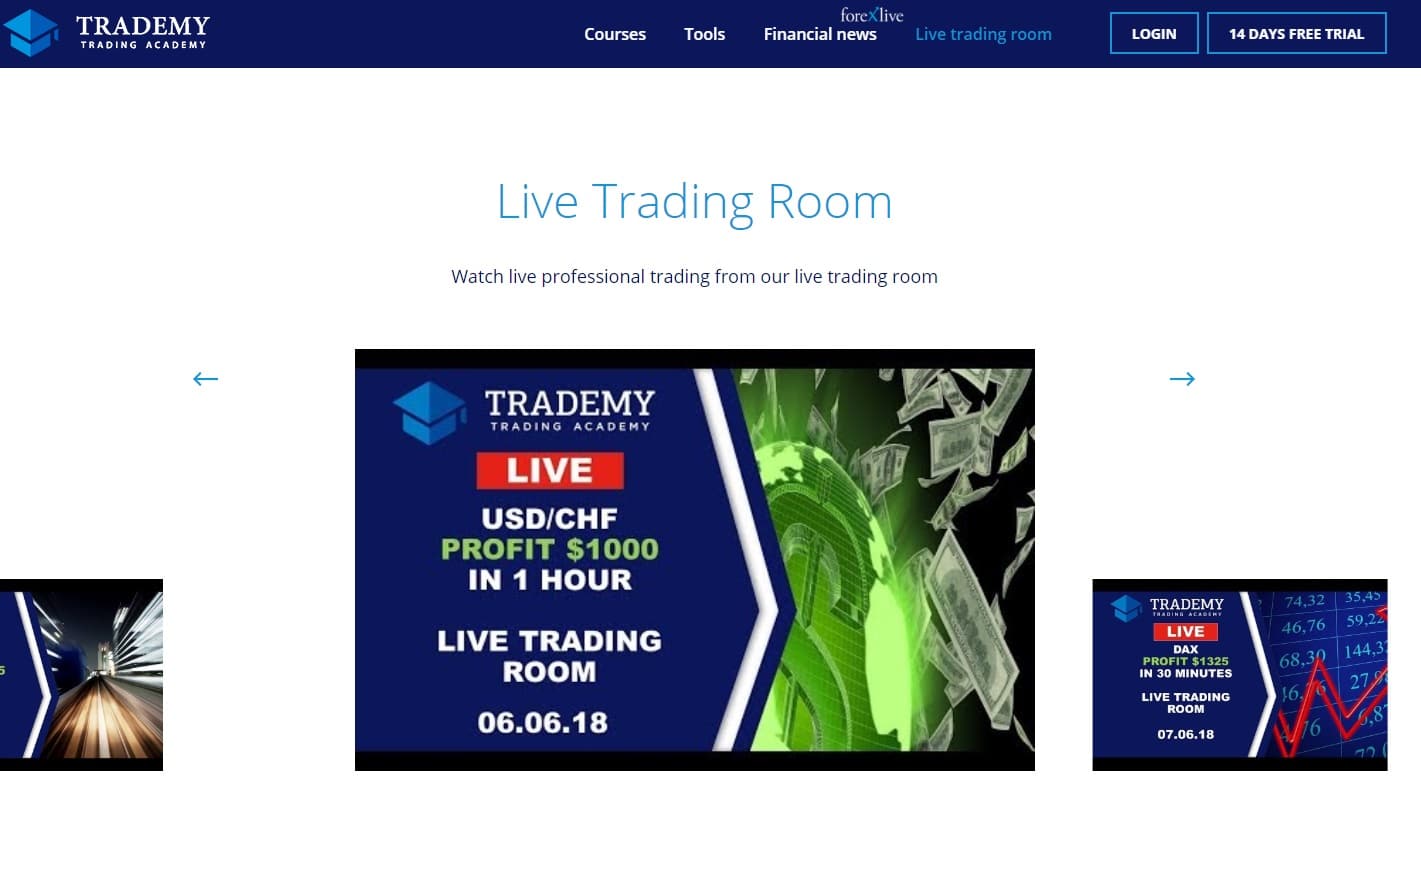 Trademy Live Trading Room